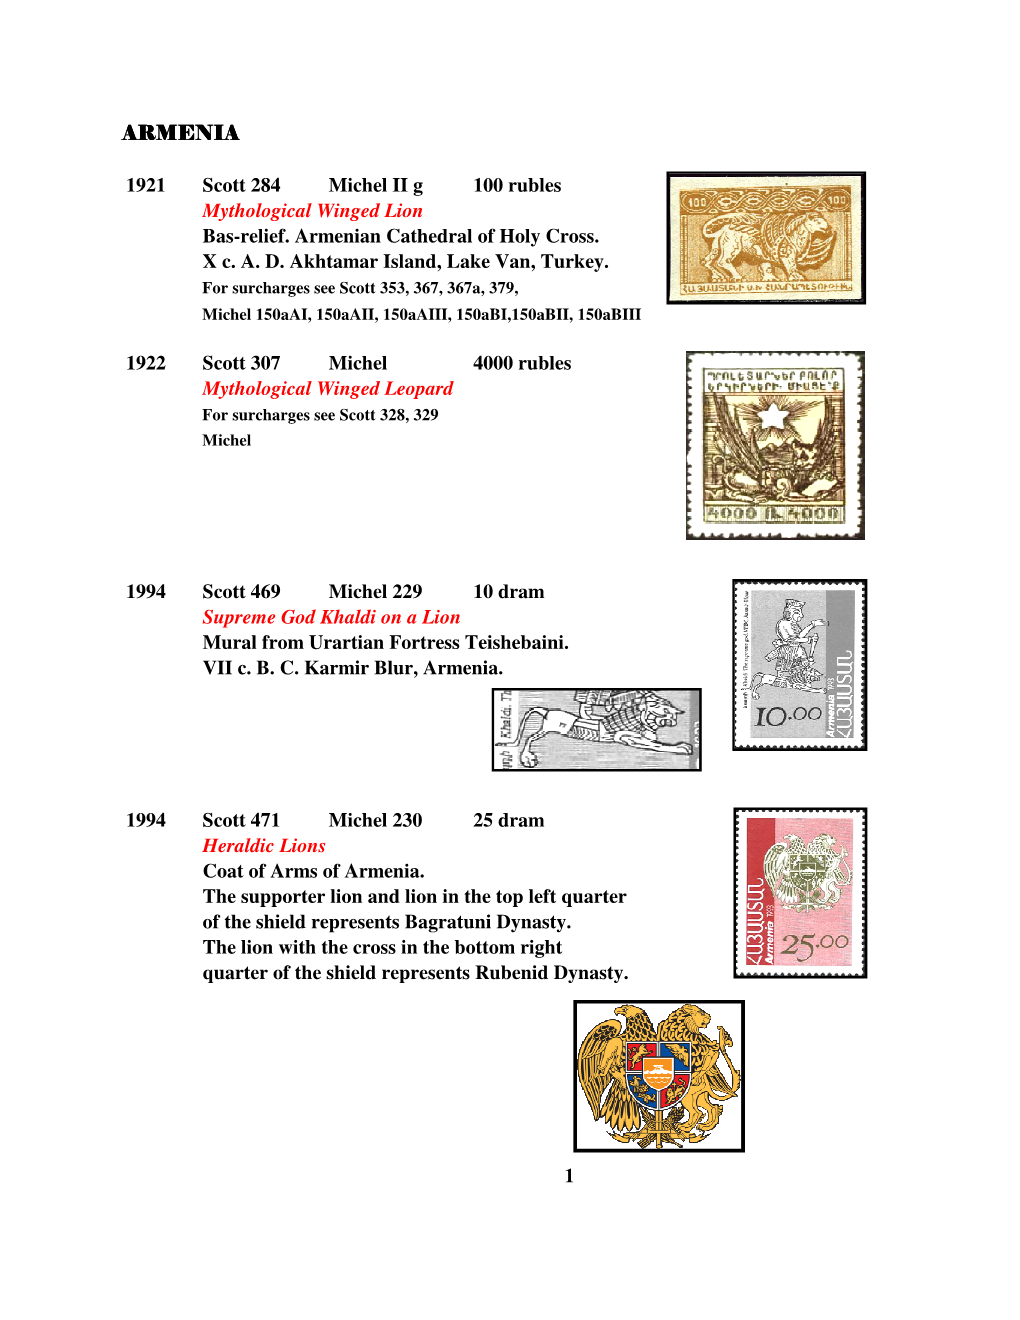 Felines on Armenian and Armenia Related Stamps